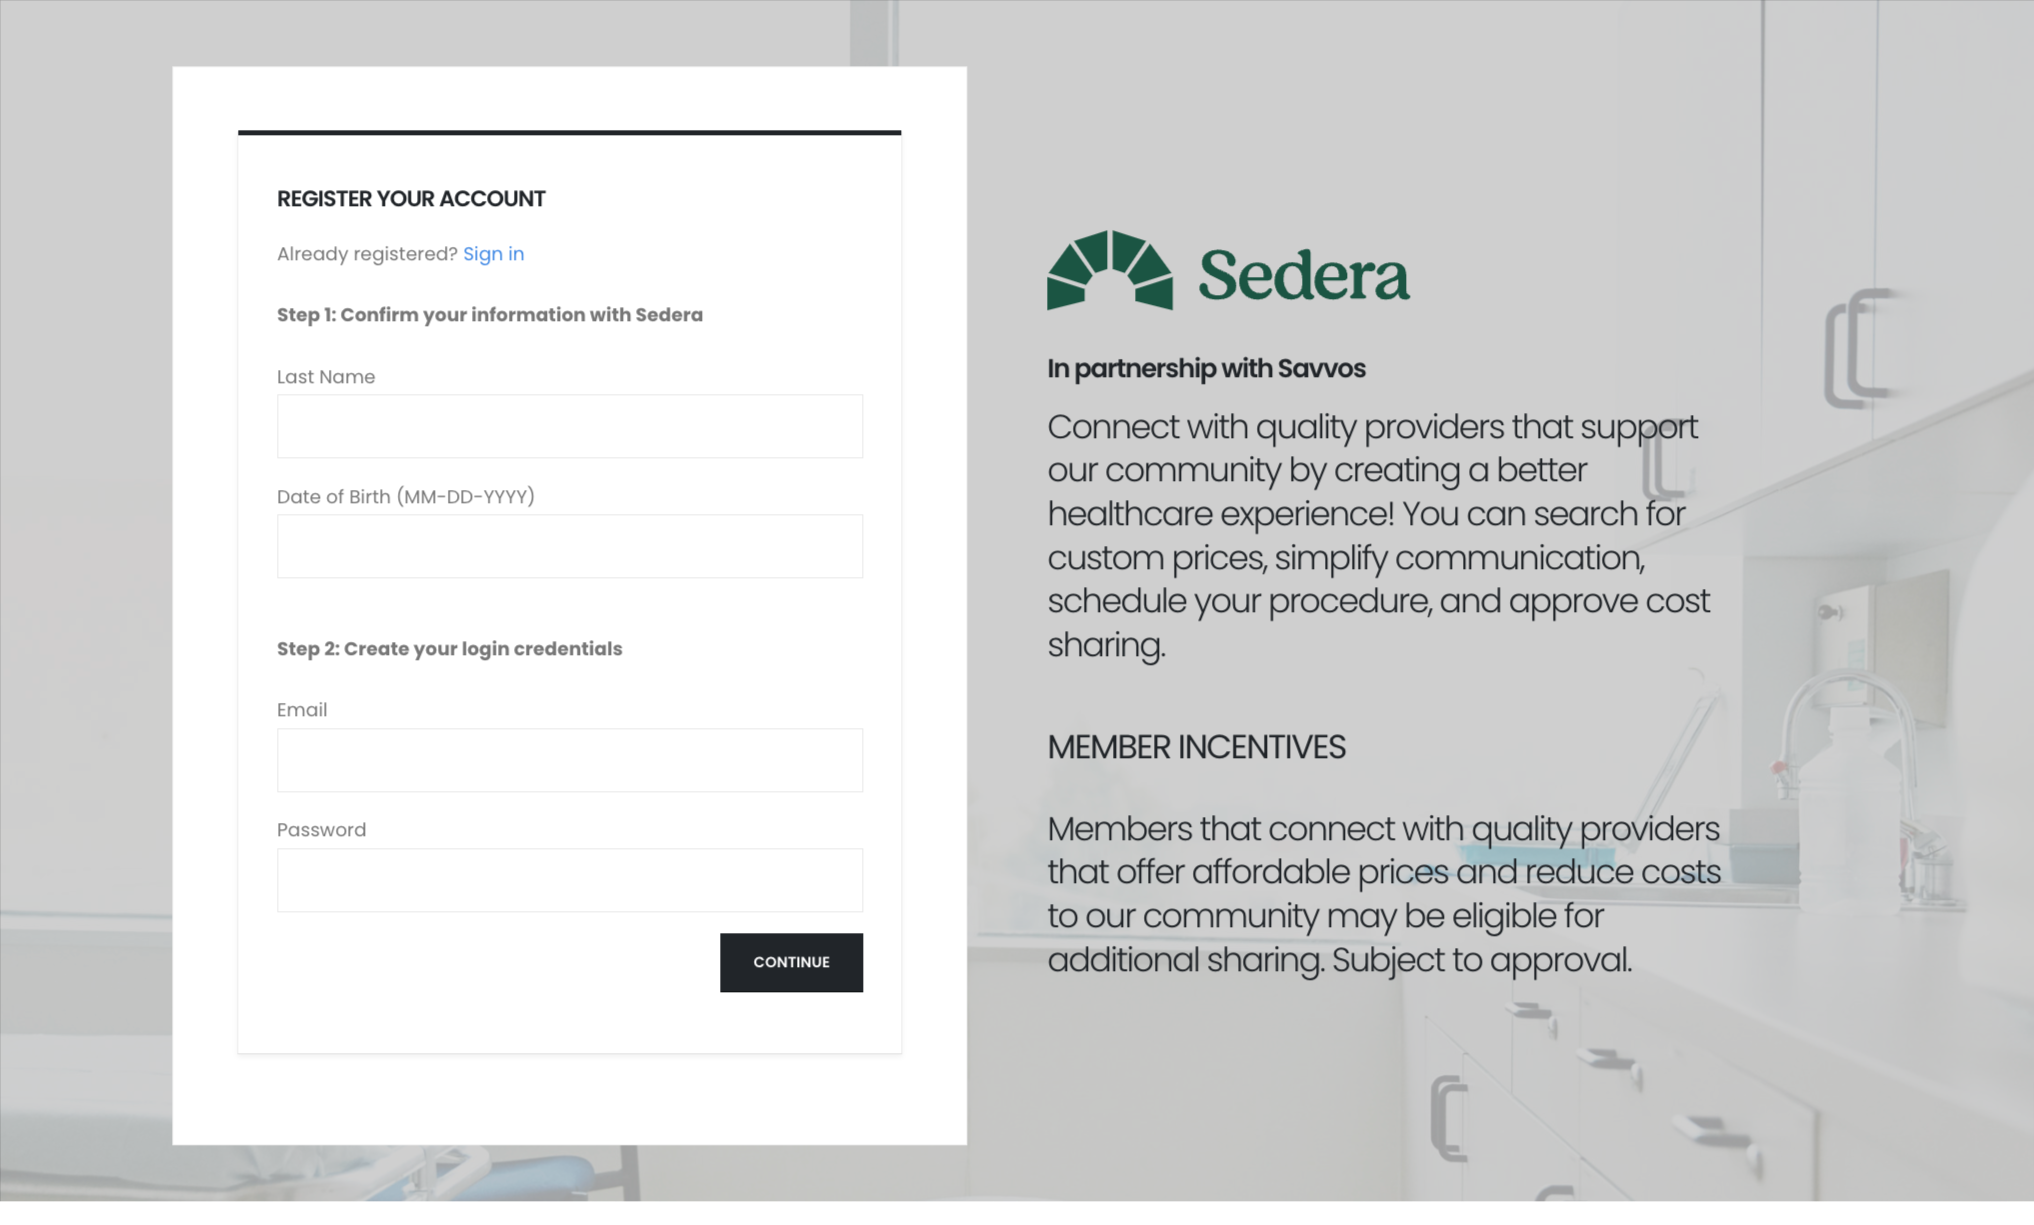 Sedera and Savvos screen showing how to register for an account for affordable prices and reduced costs.